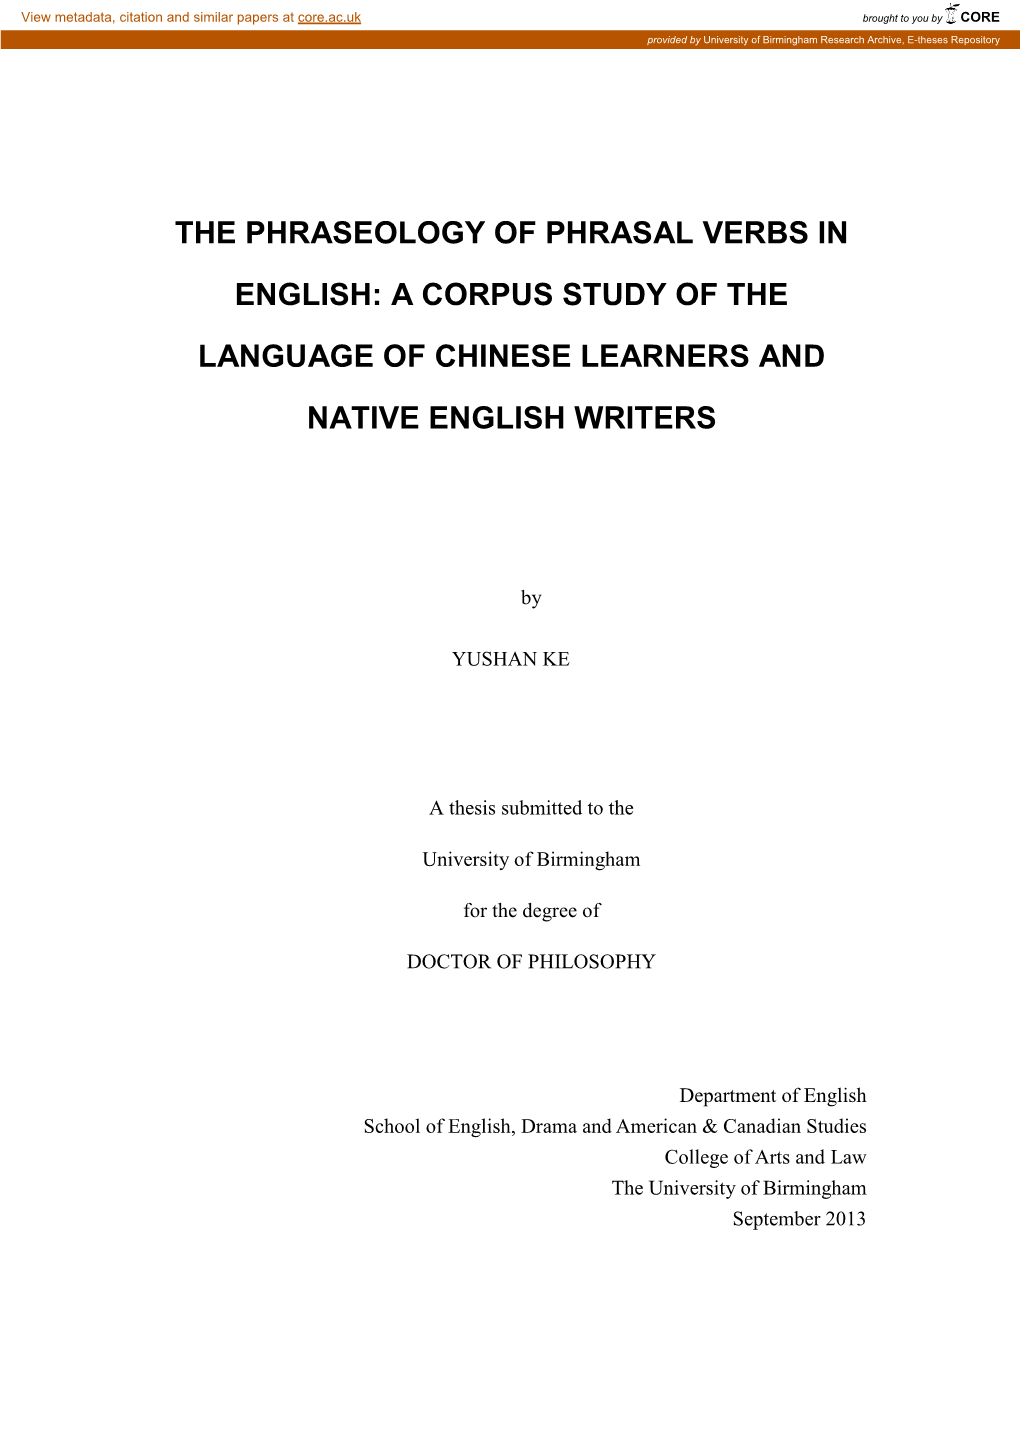 The Phraseology of Phrasal Verbs in English: a Corpus Study Of